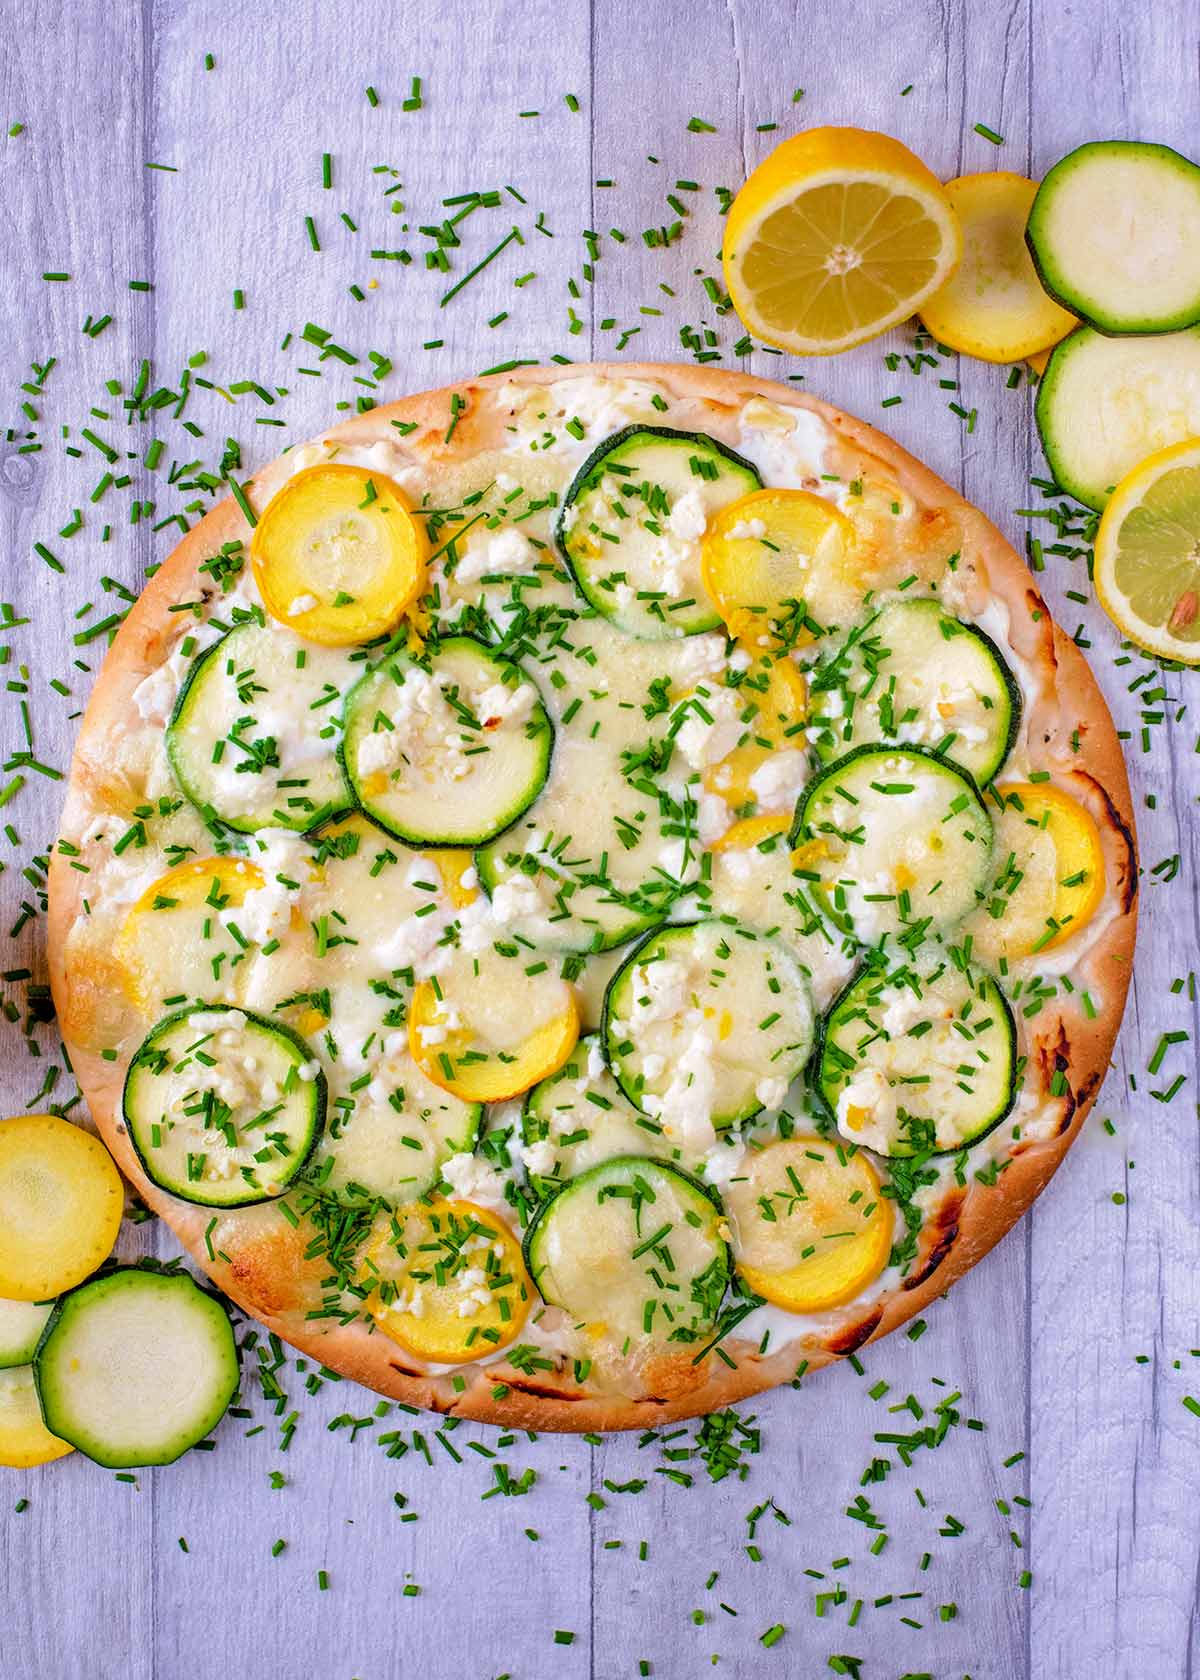 A courgette pizza on a wooden surface surrounded by chopped chives.